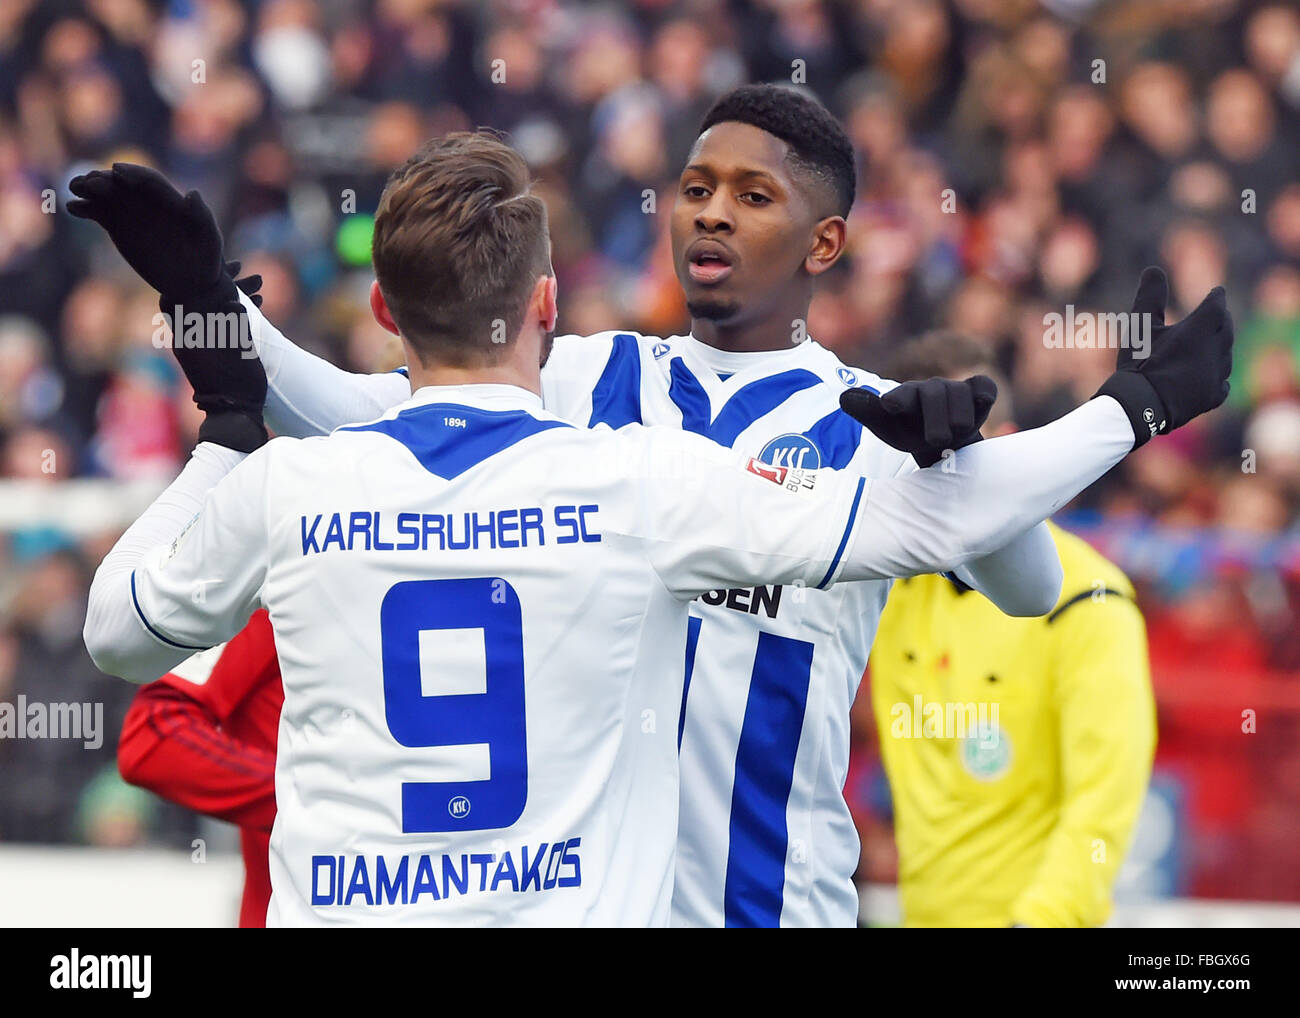 Karlsruhe, Germany. 16th Jan, 2016. Karlsruhe's Boubacar Barry (R) celebrates his 1-0 goal with Dimitris Diamantakos during the test match between Karlsruher SC and FC Bayern Munich in Wildpark Stadium in Karlsruhe, Germany, 16 January 2016. Munich's goalkeeper Manuel Neuer stands to the right. Photo: ULI DECK/dpa/Alamy Live News Stock Photo